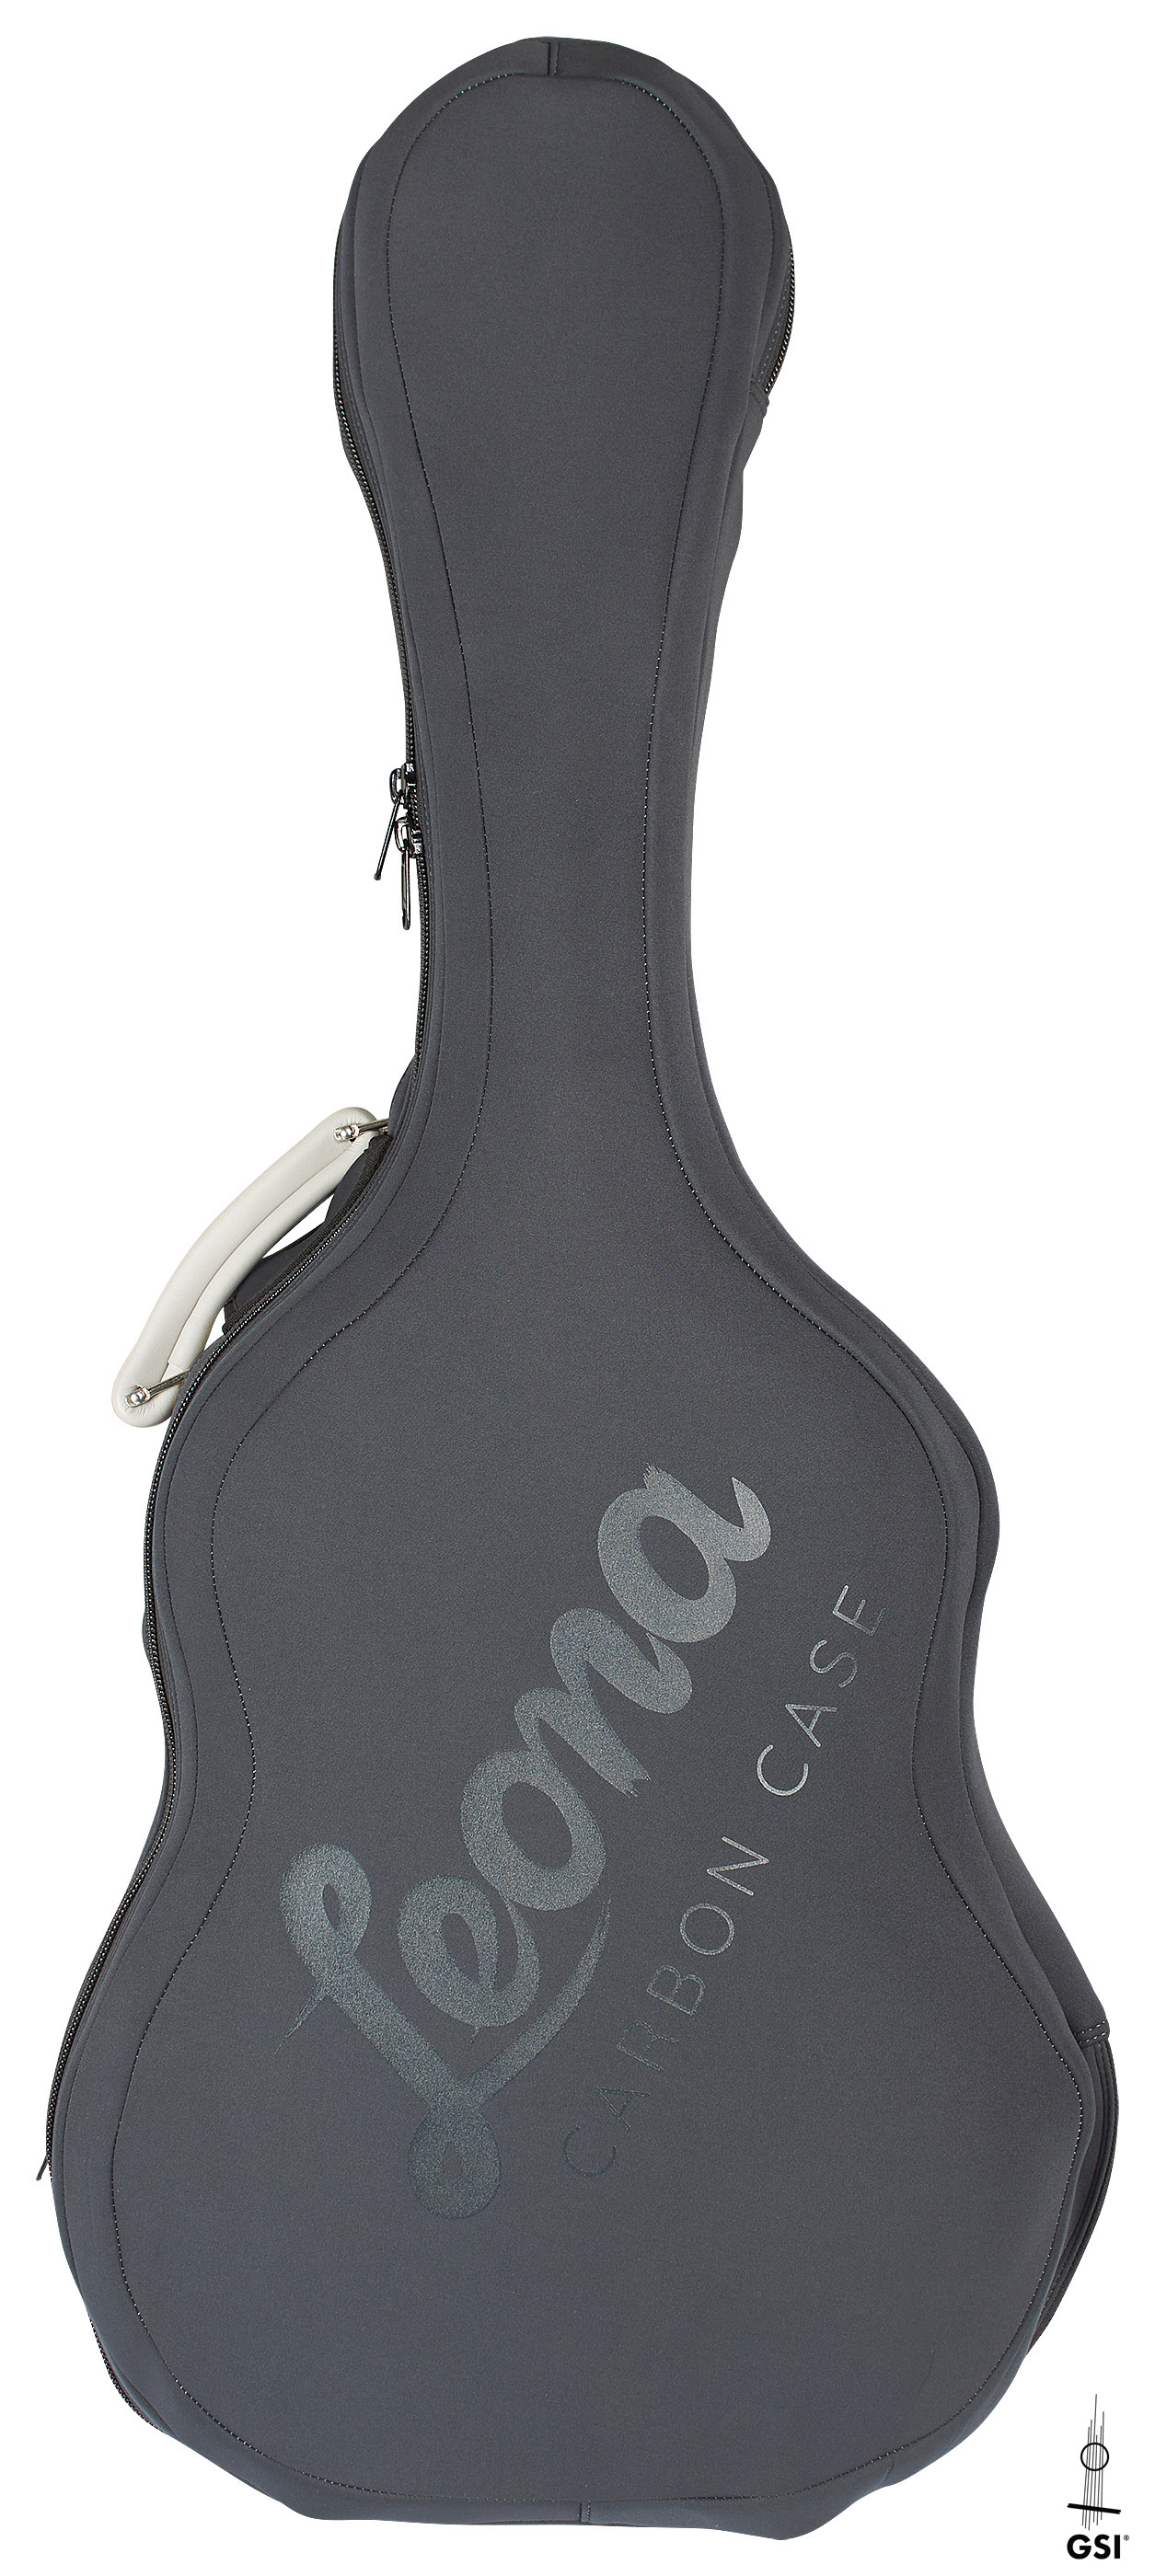 “Luthier Series Carbon Case COVER” by Leona Cases - Black